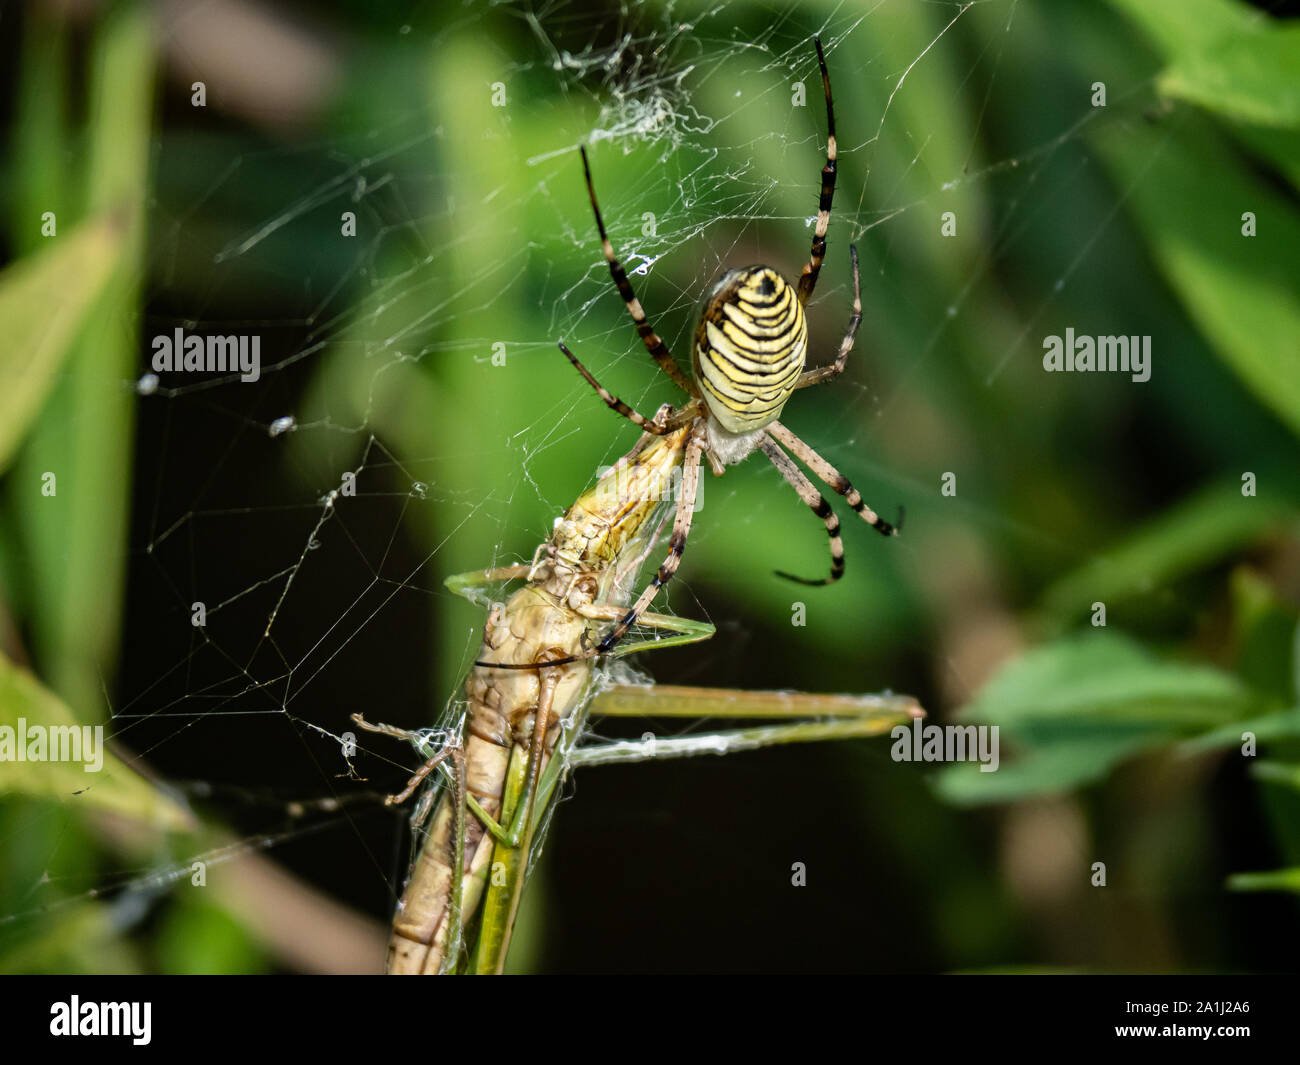 A large argiope amoena spider sits in its web feeding on a grasshopper that recently blundered into its web. Stock Photo